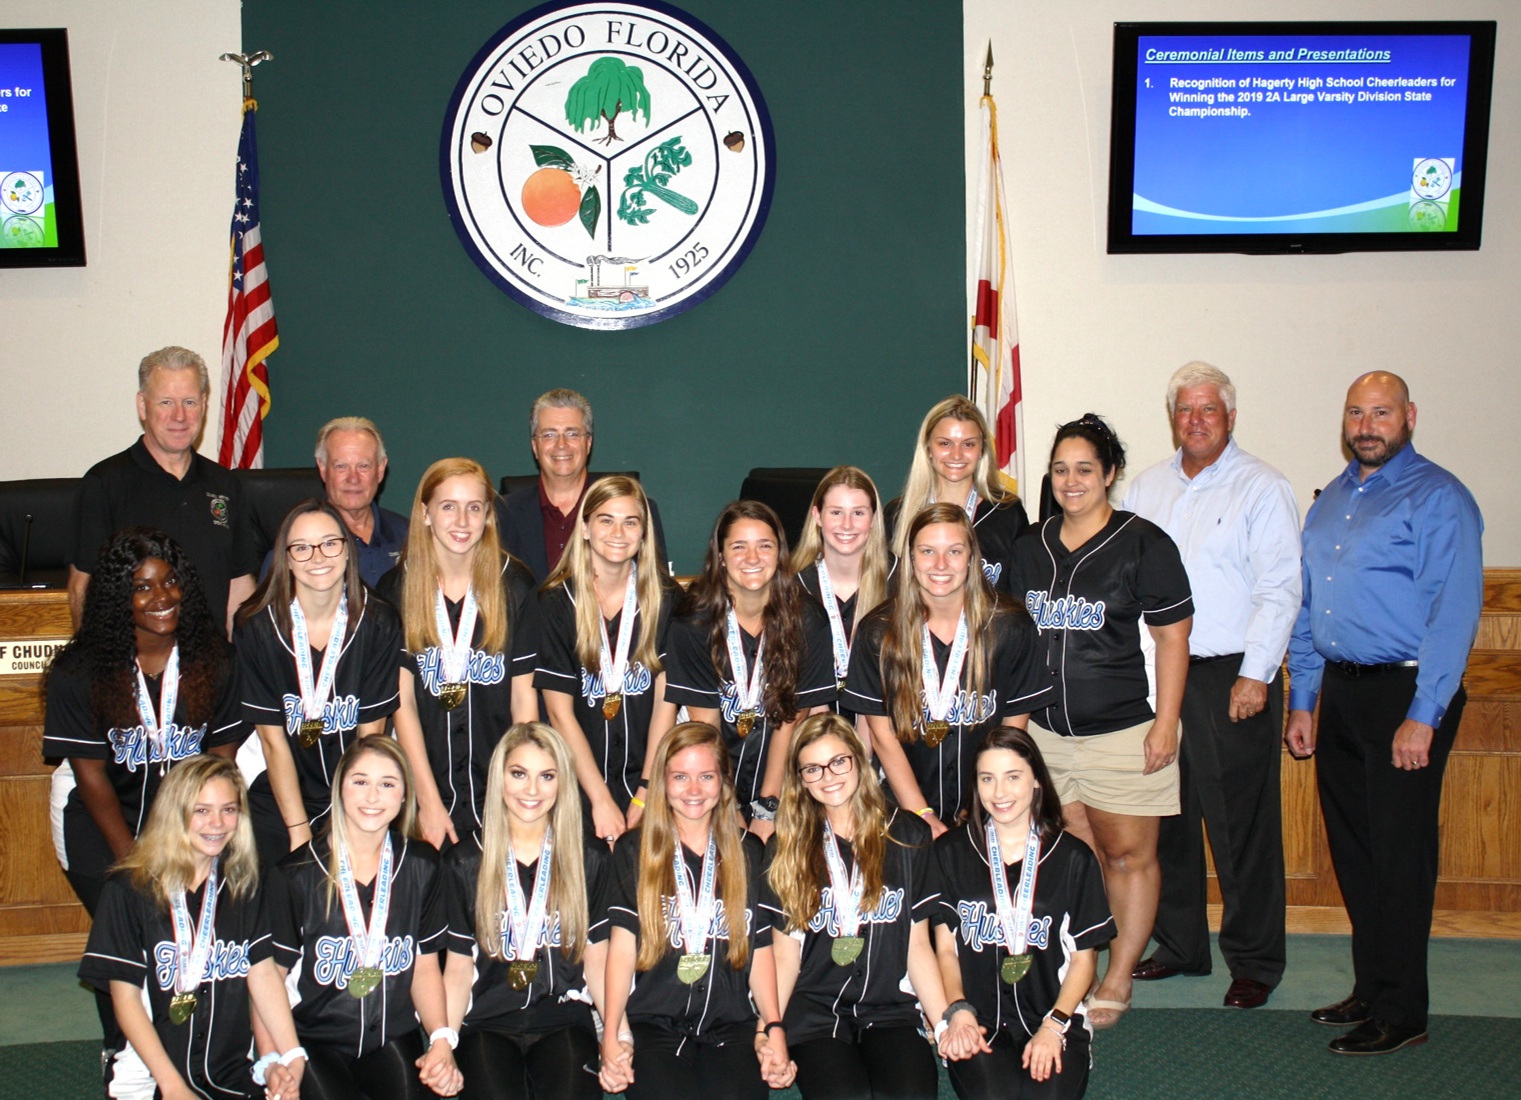 oviedo-city-council-recognizes-hagerty-cheerleaders-sanford-herald